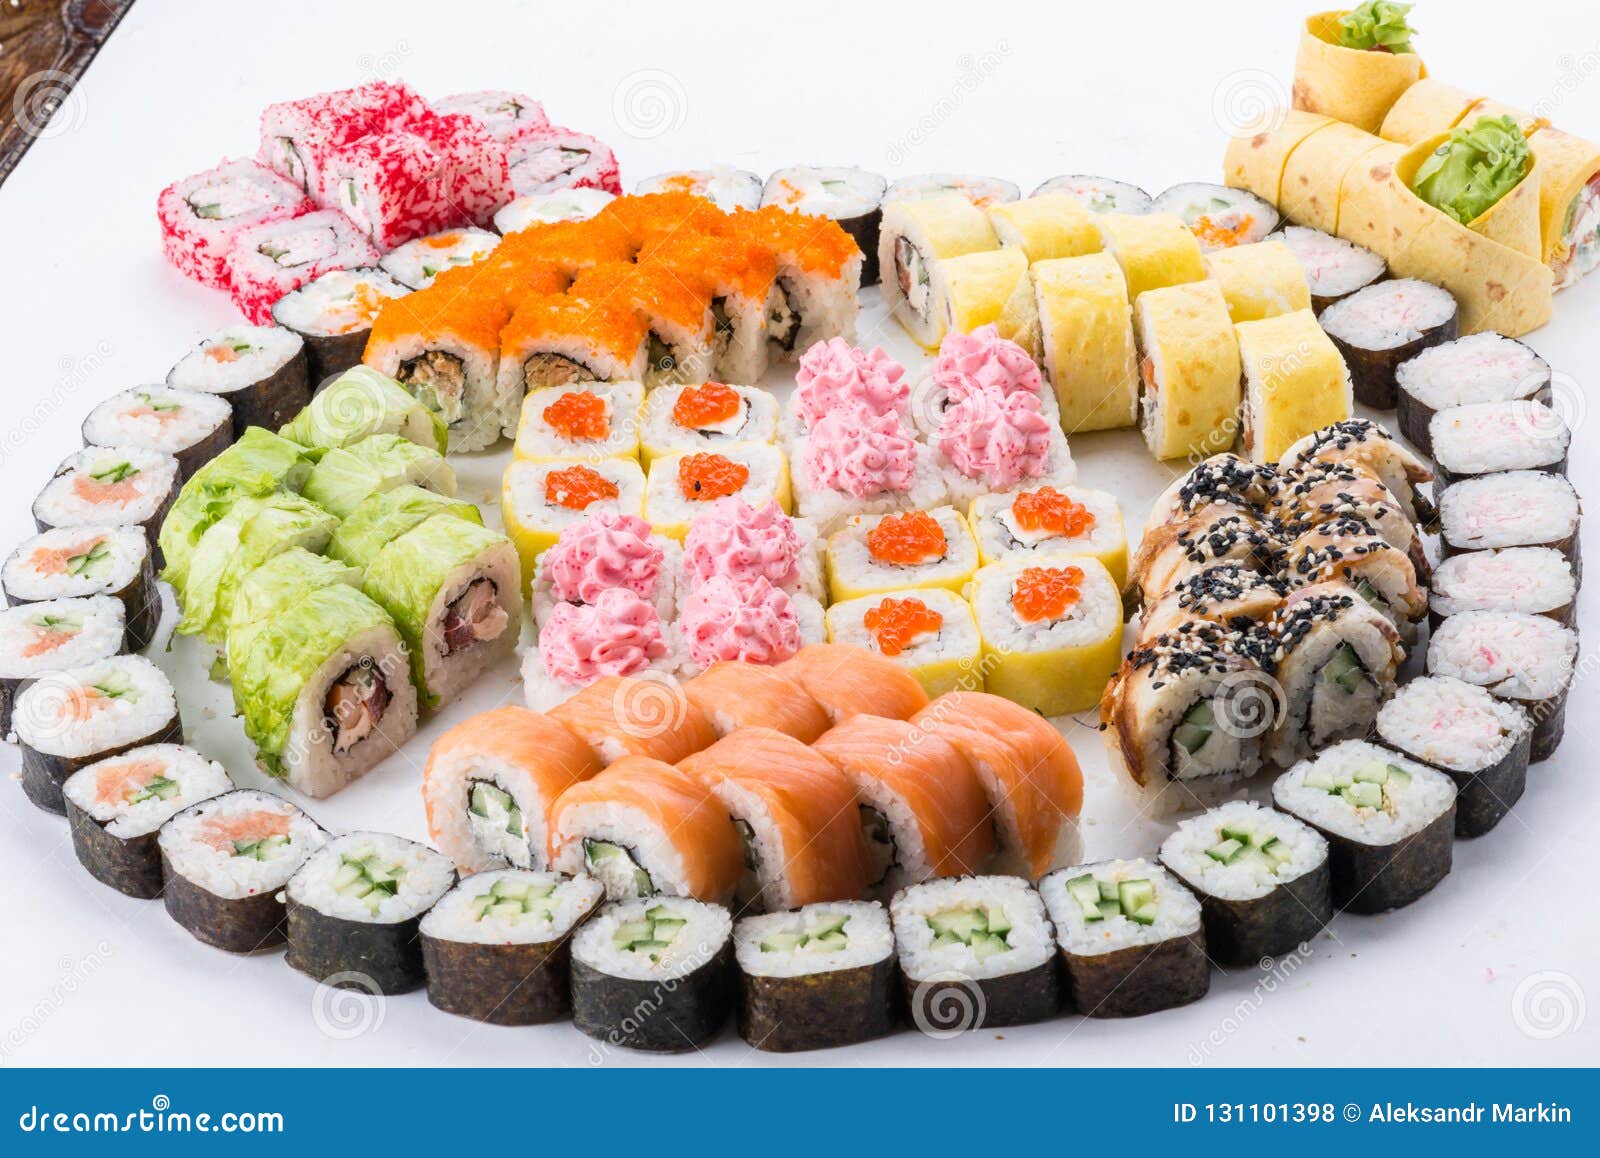 Eating delicious food. Chopsticks taking sushi roll from plate. Seafood  delicatessen salmon gunkan maki on wooden platter. Delicacy gourmet snacks.  Luxury lifestyle, expensive food, restaurant menu Stock Photo